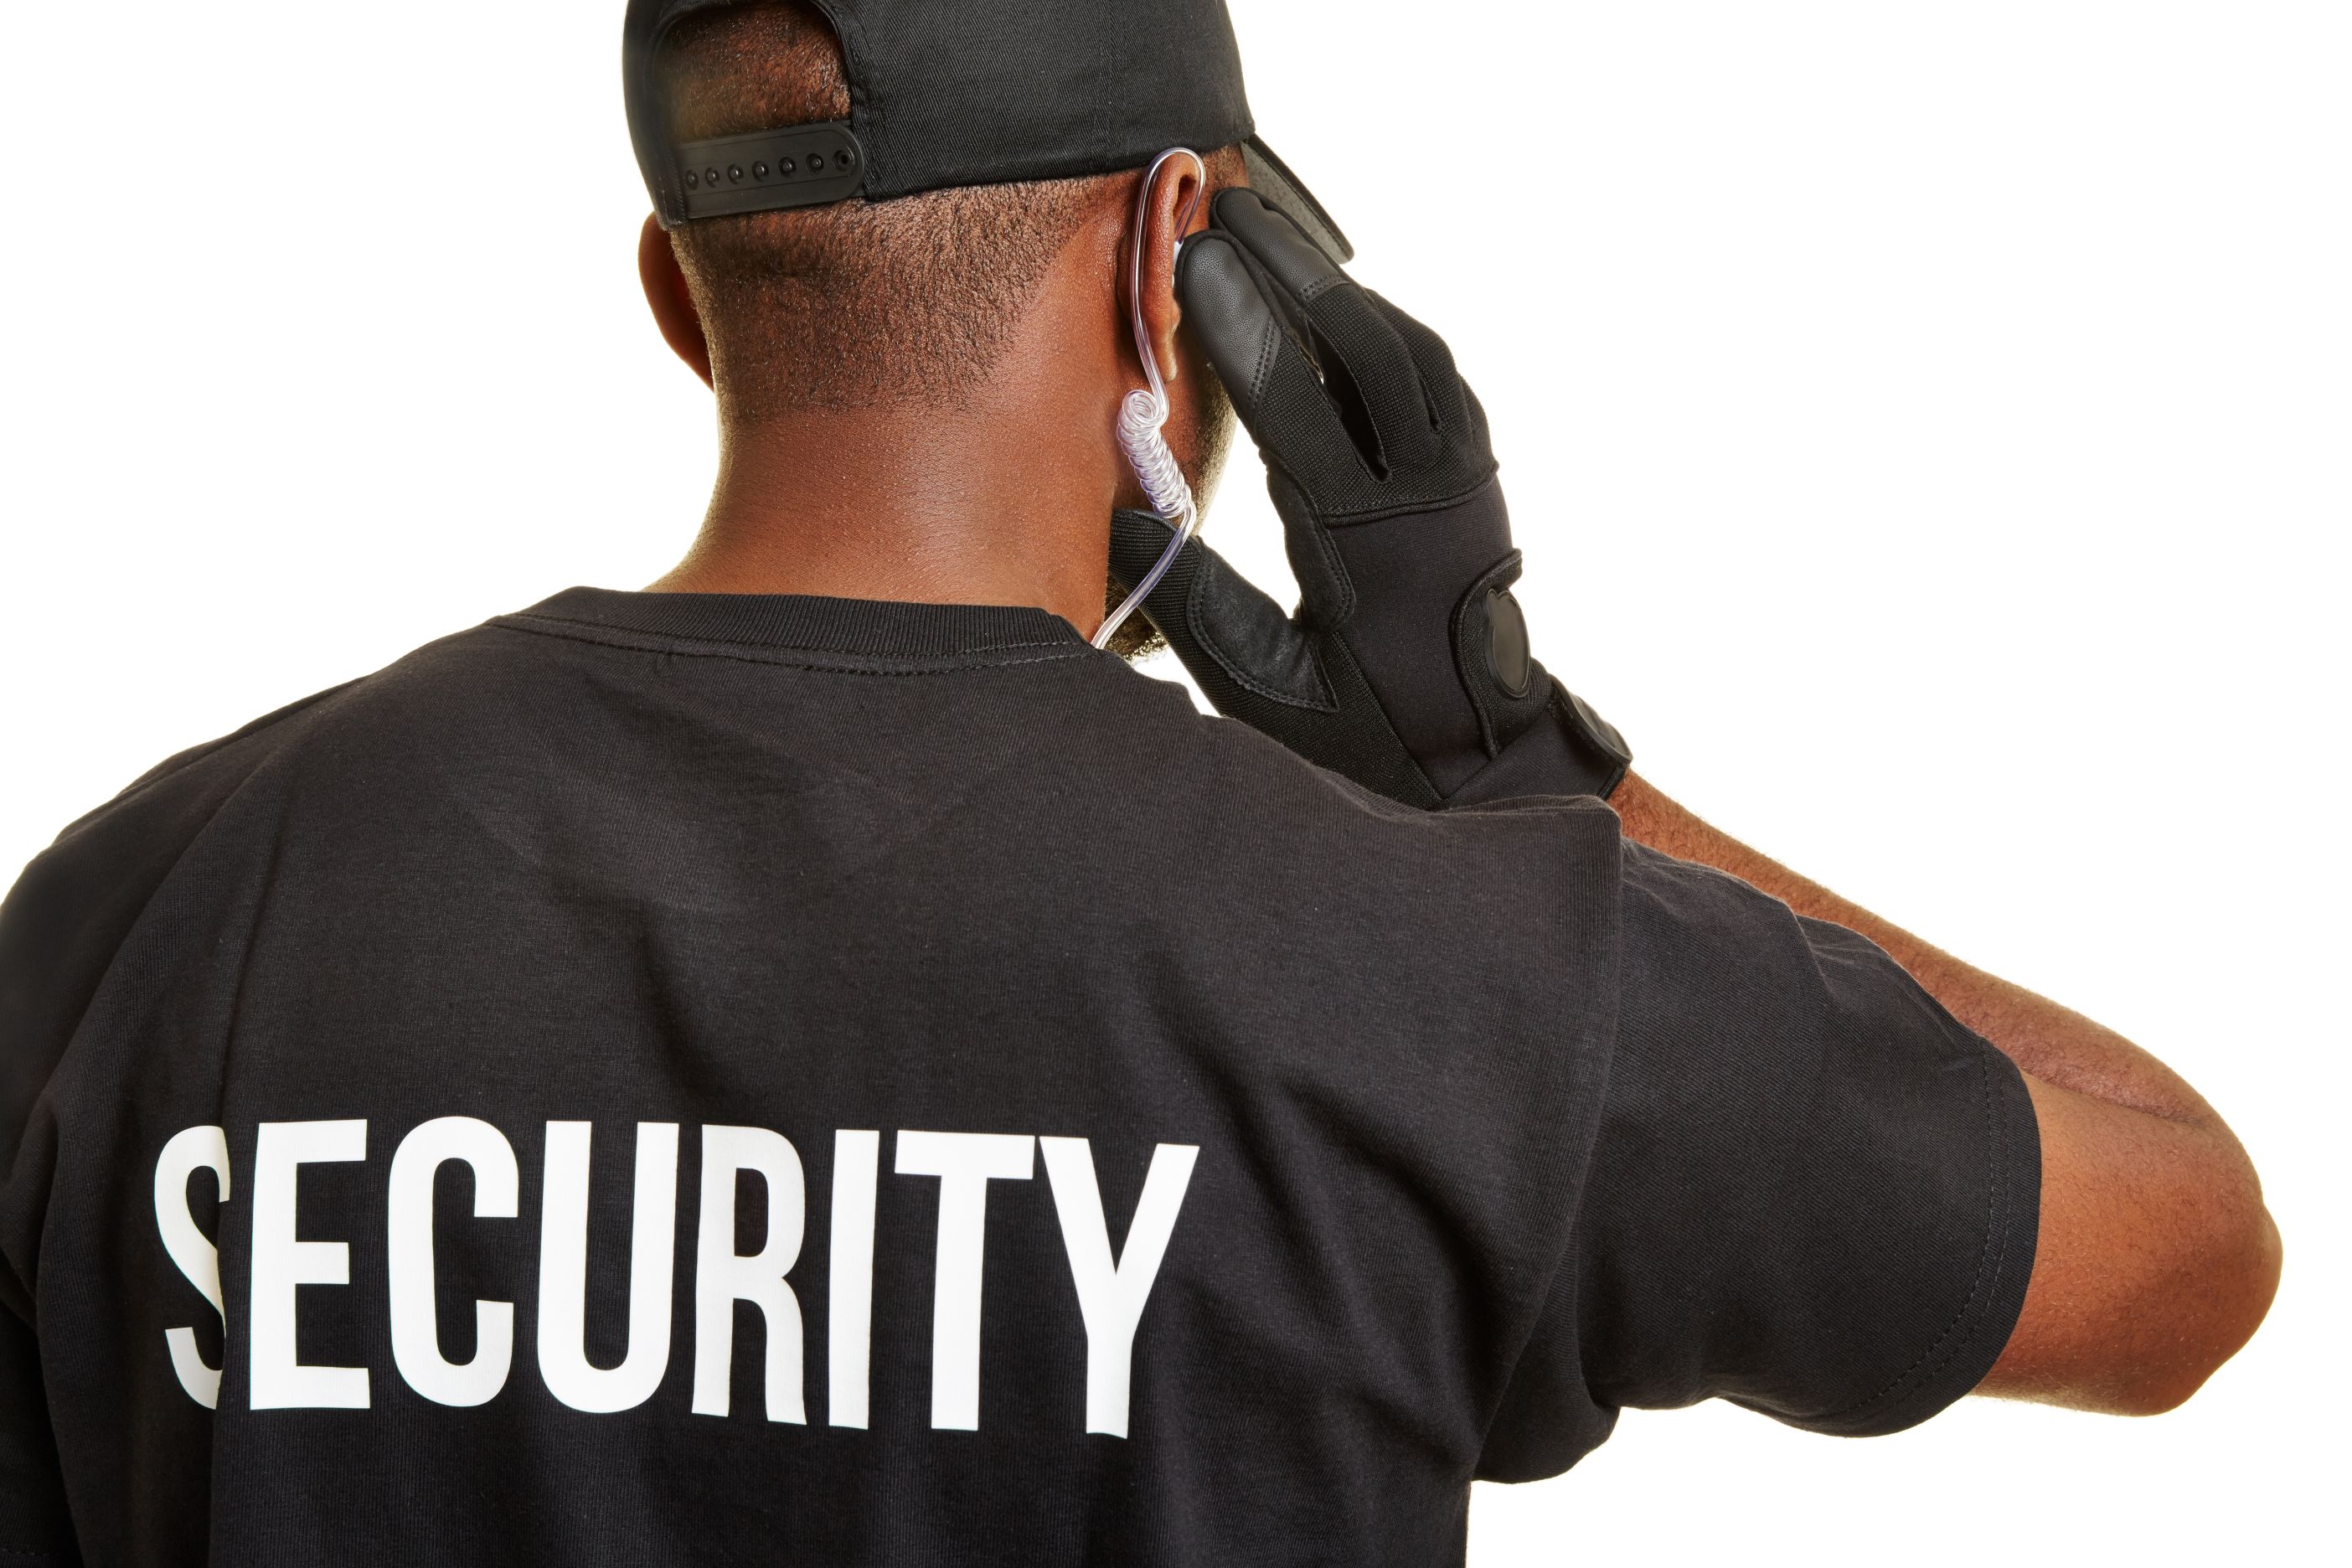 Personal Security Services